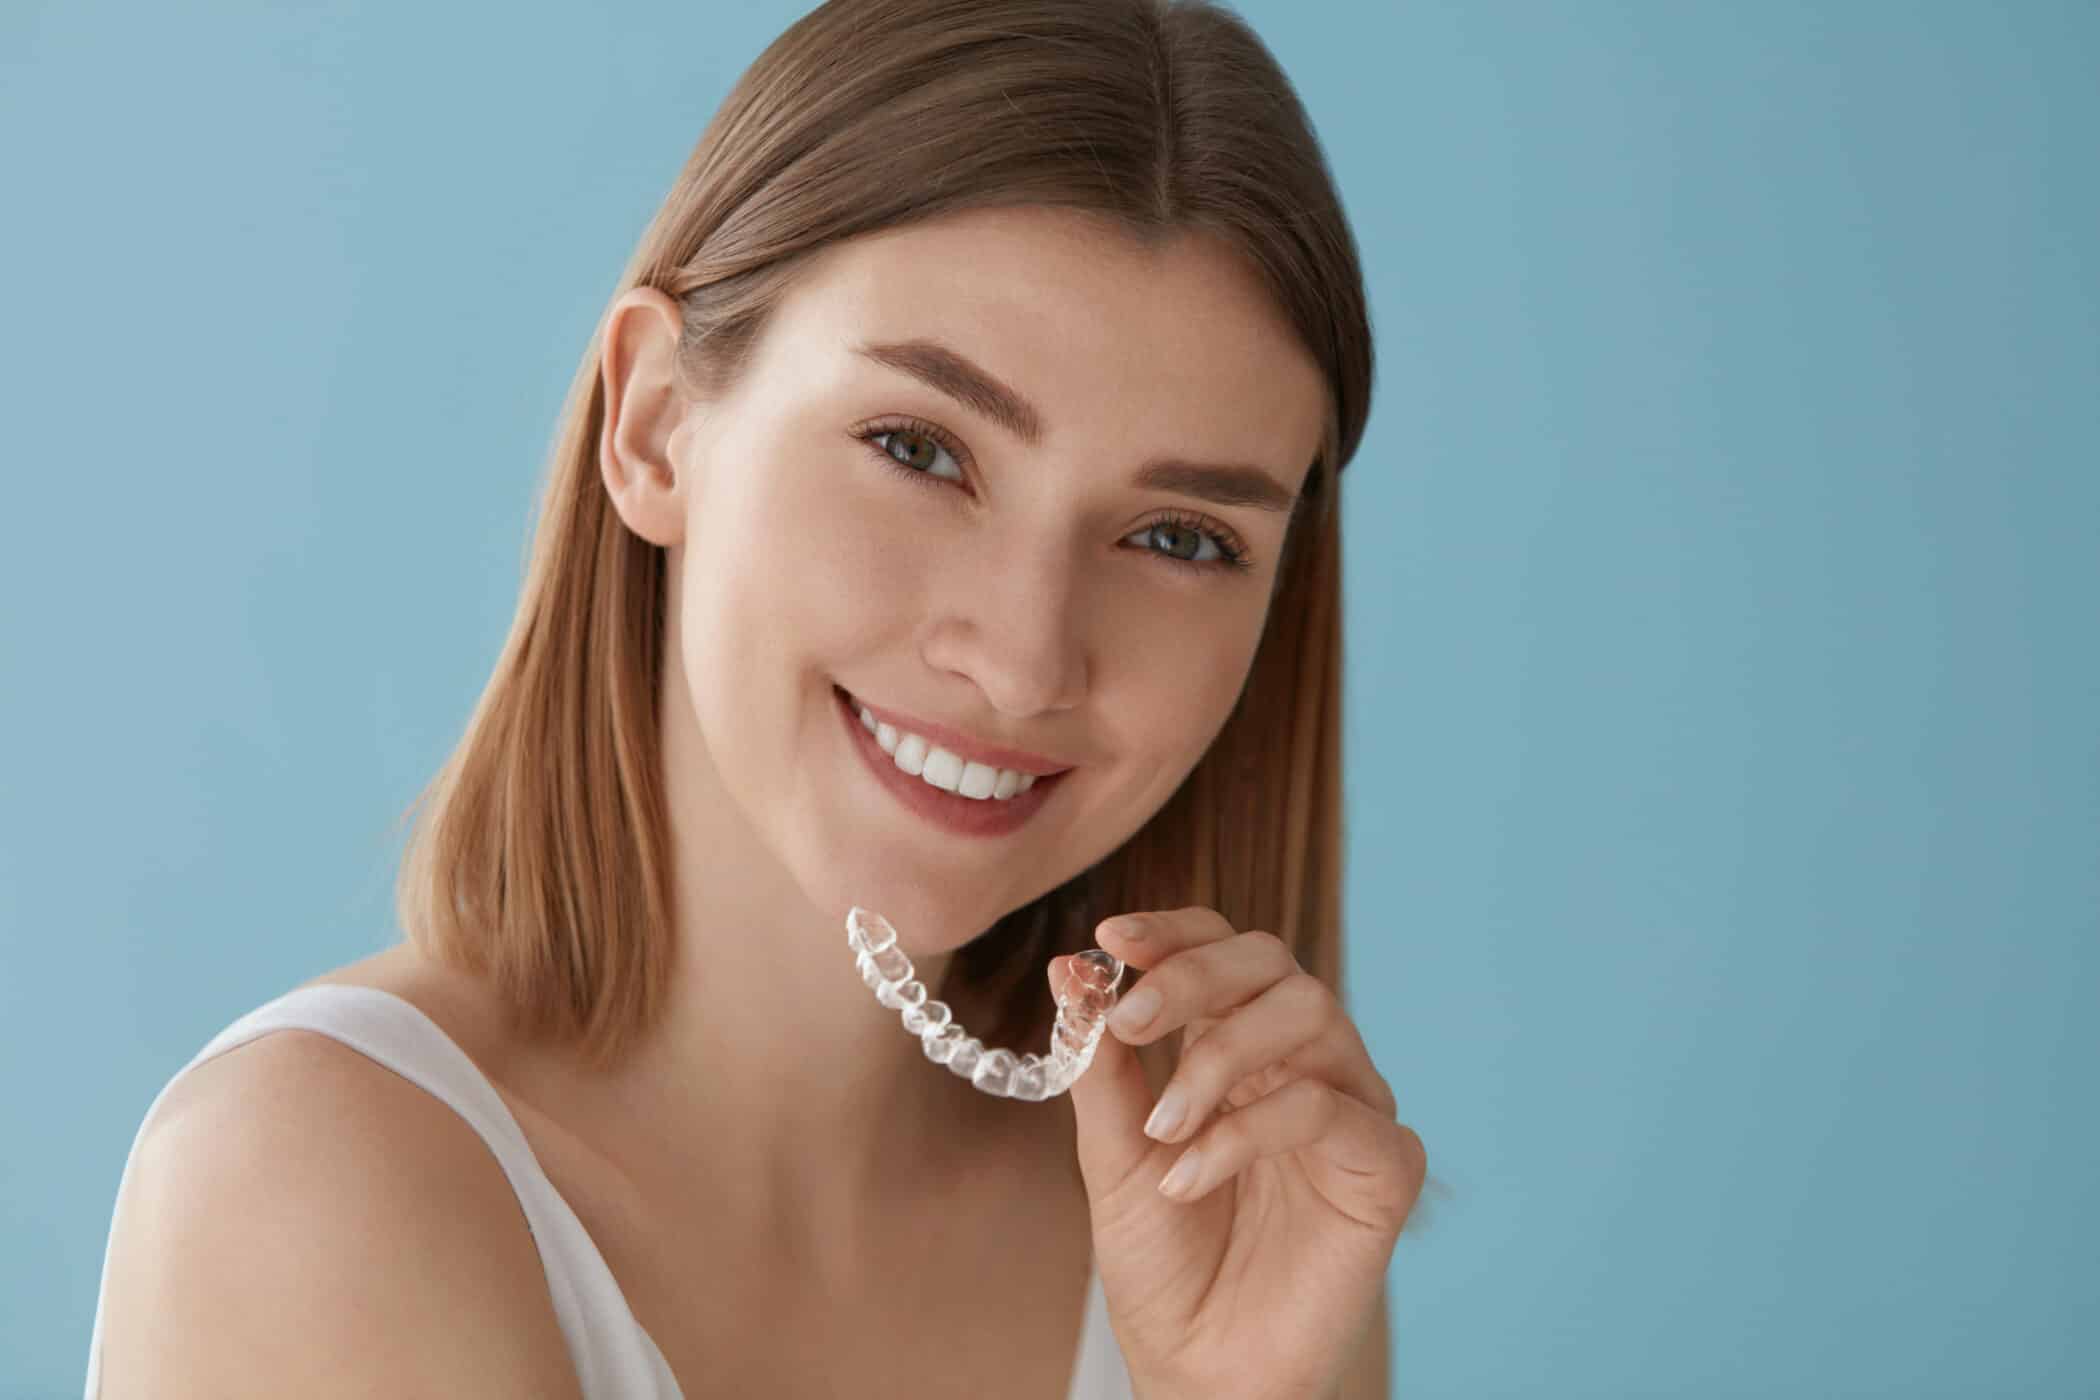 Woman using invisalign clear braces